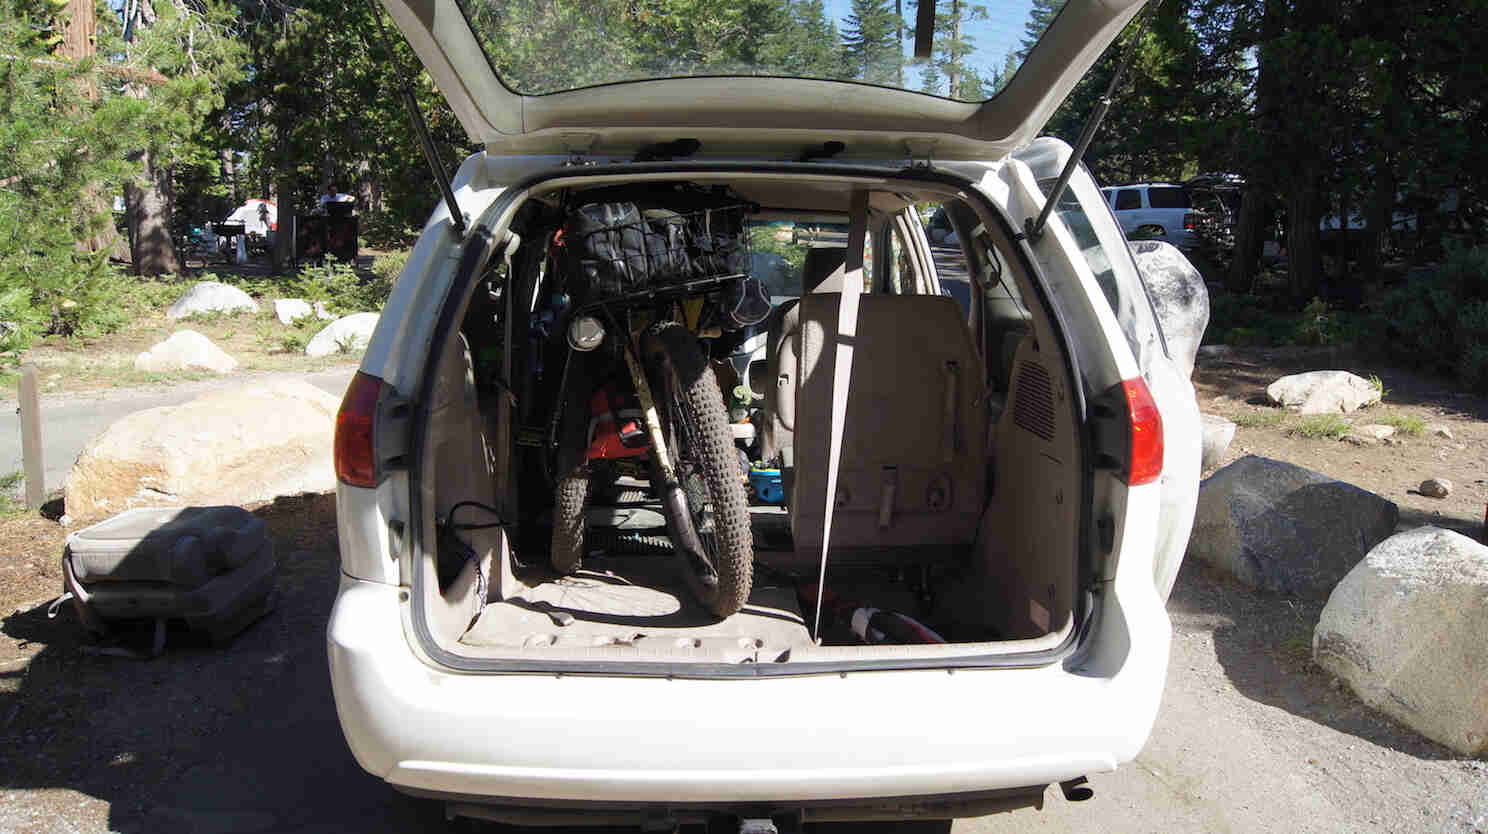 Rear view of a minivan with the back door open, with bike loaded in back